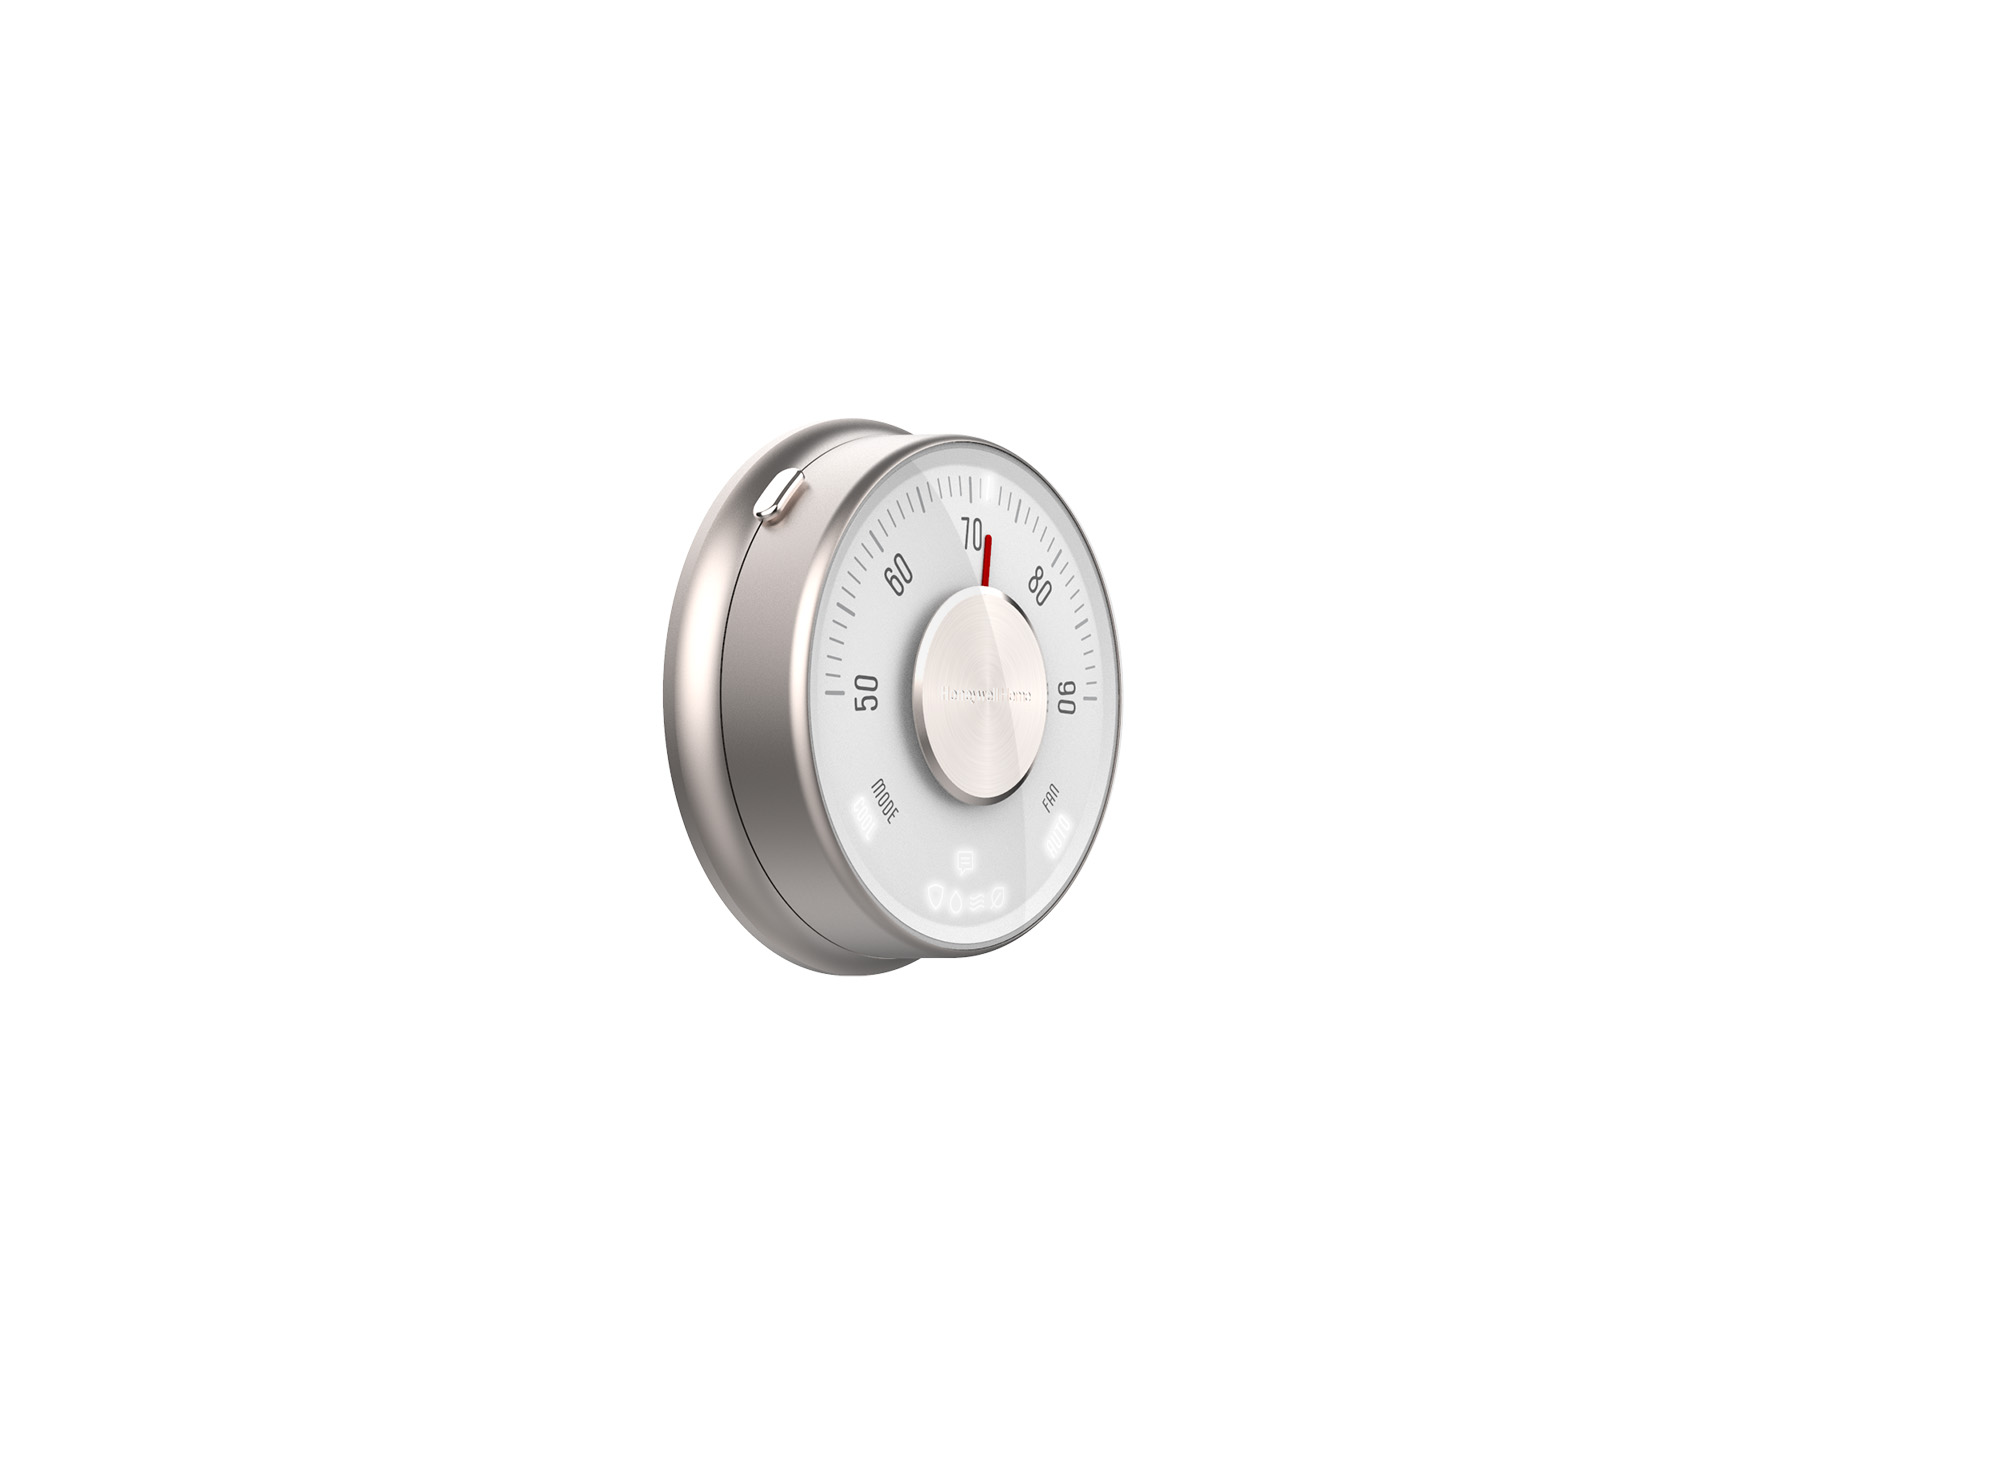 Honeywell Home M5 Classic Thermostat